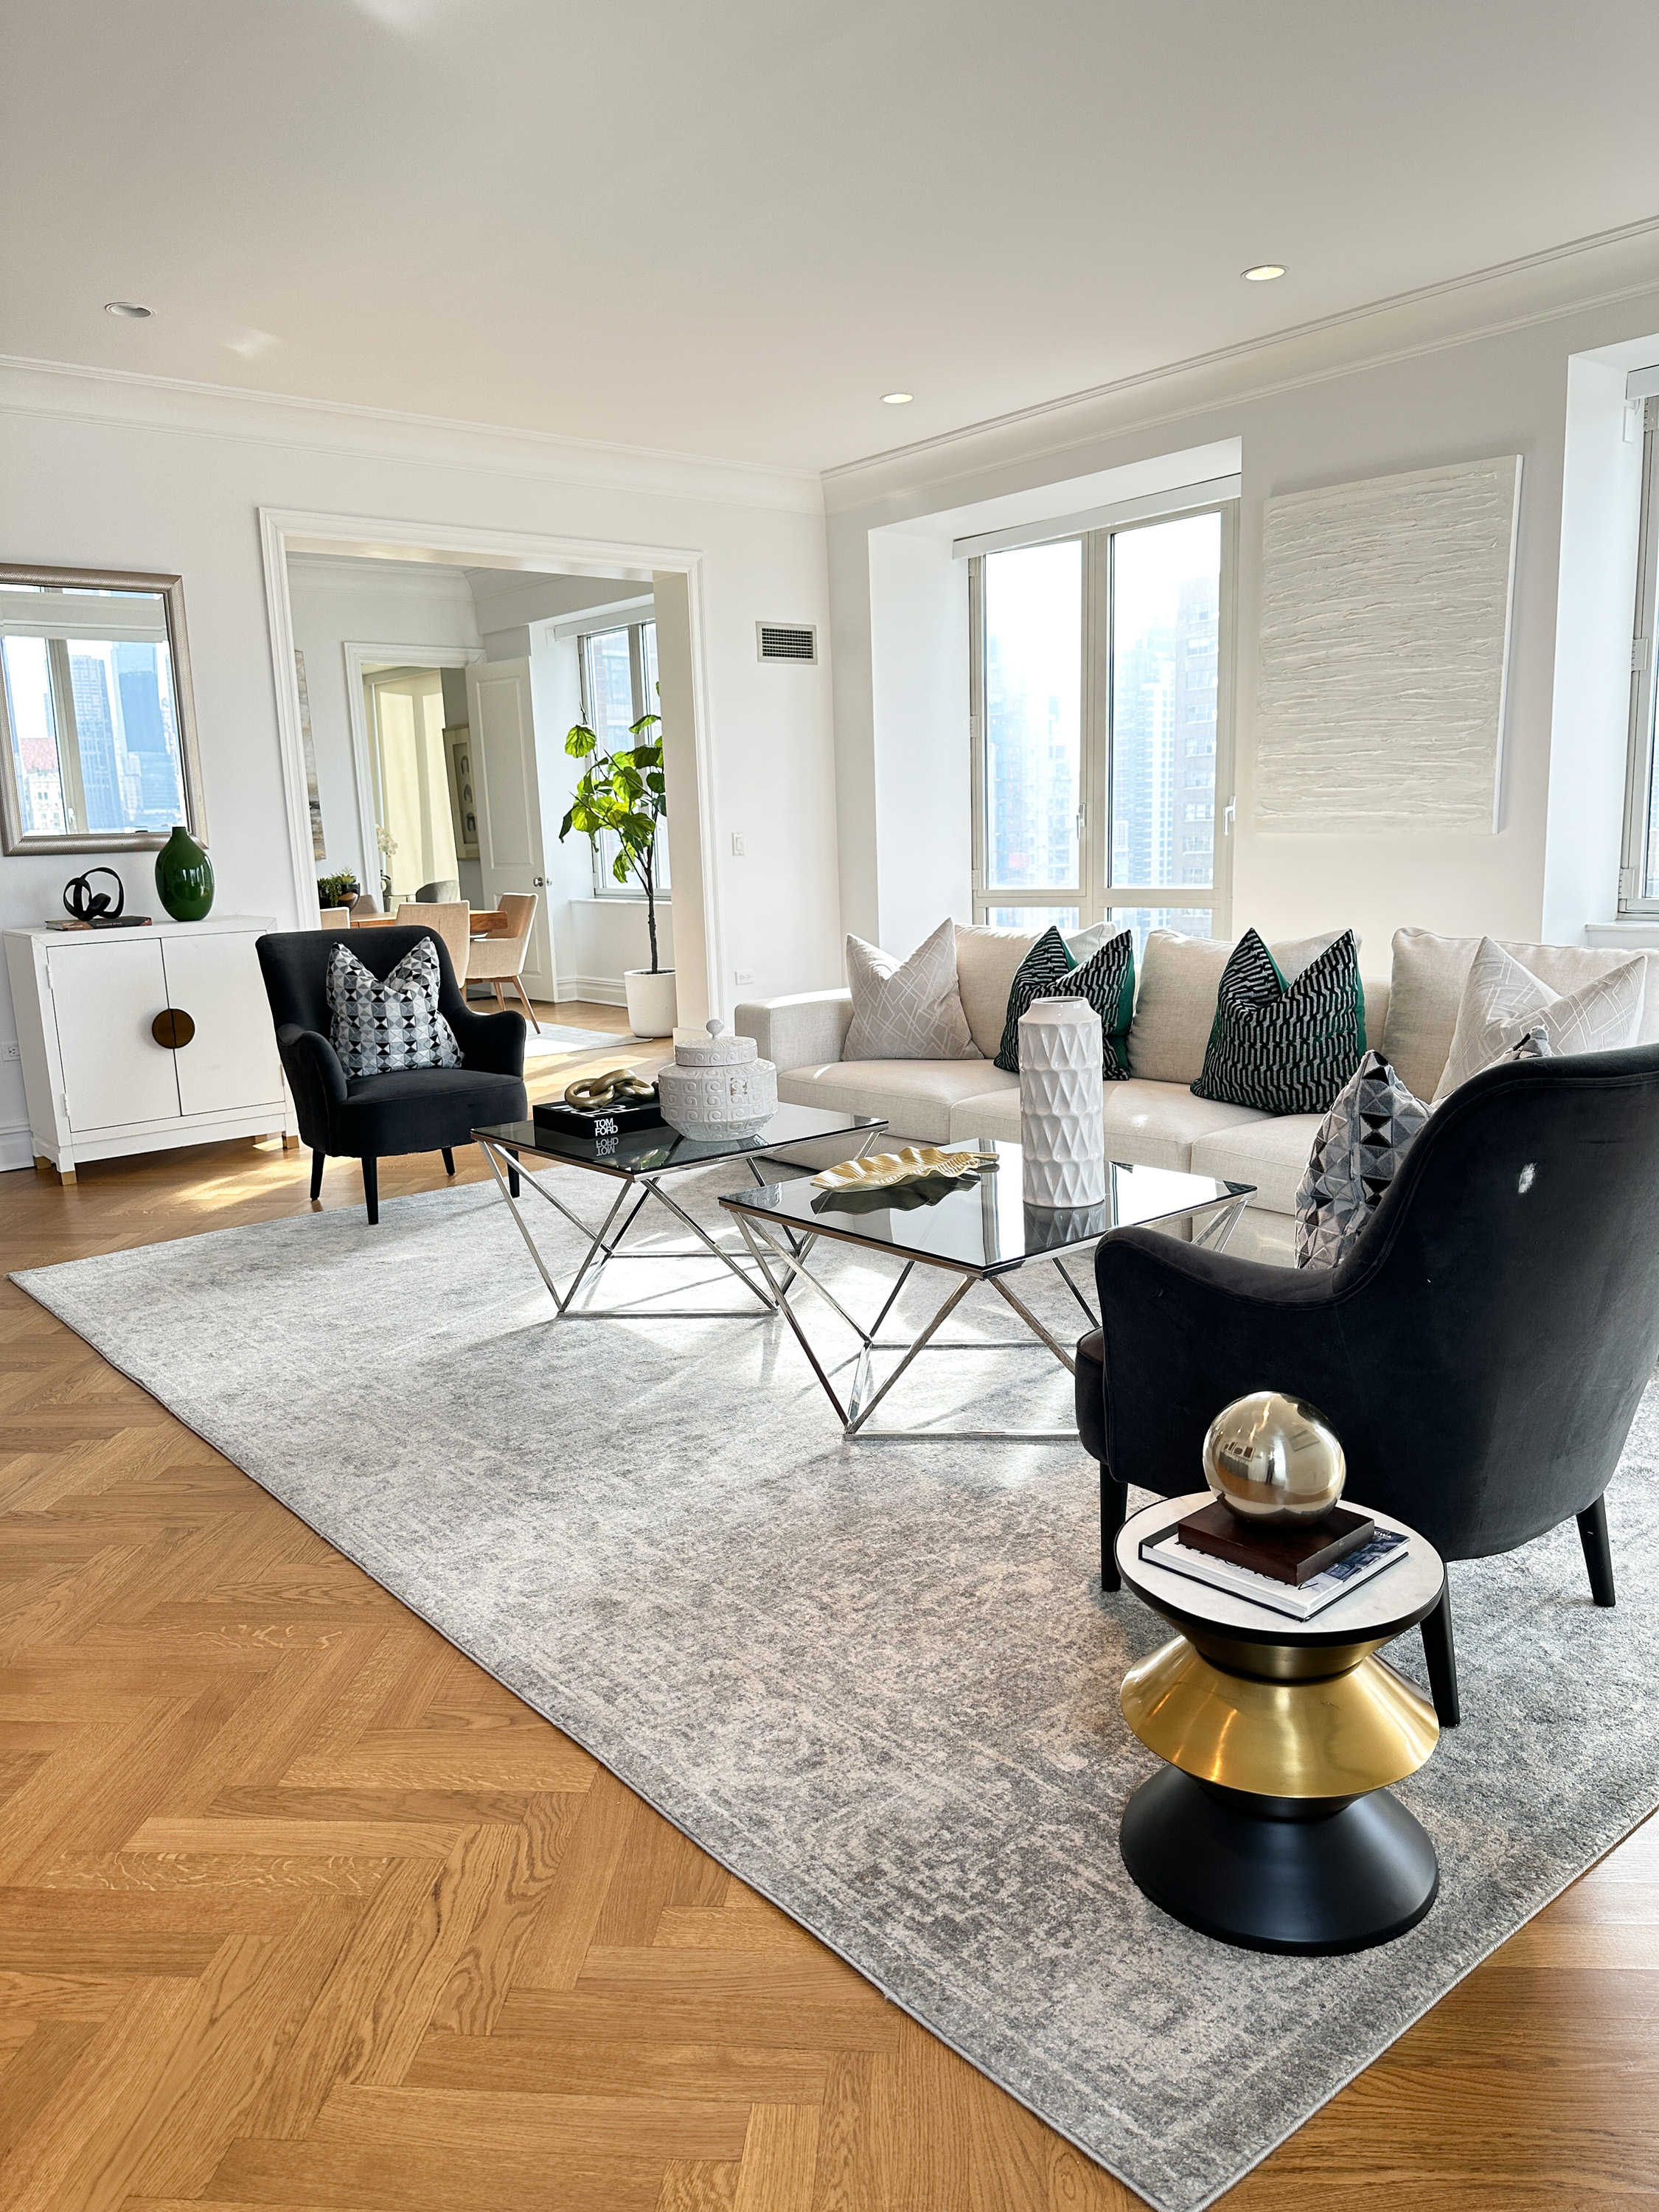 Elements of black, white and gold are repeated throughout this living room to create a sense of cohesion. 